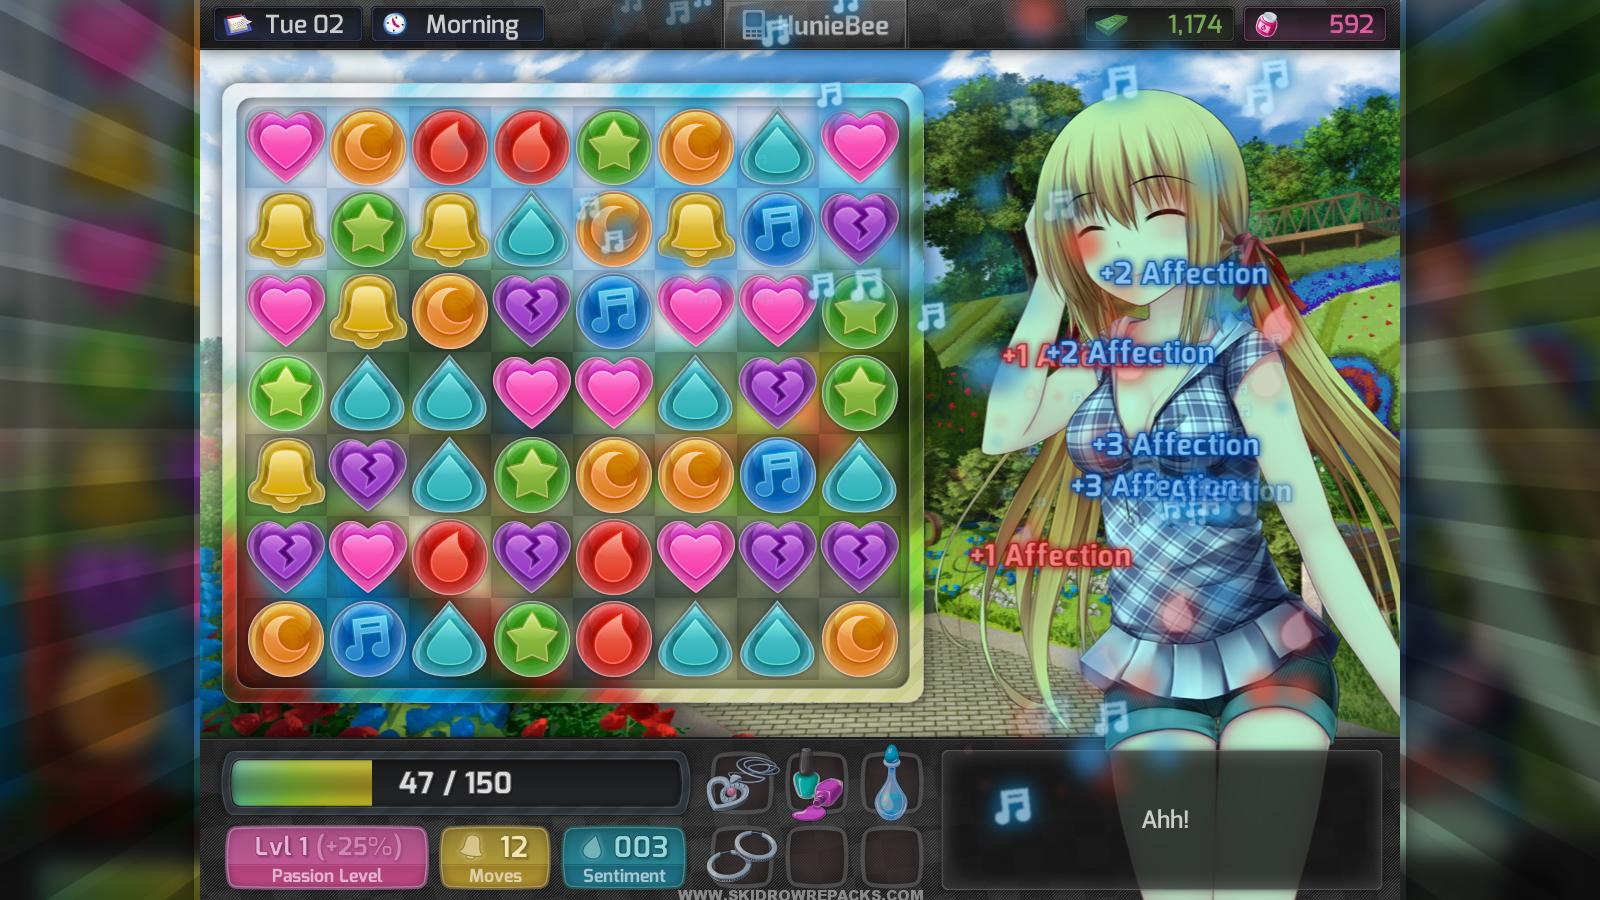 download huniepop nintendo switch for free